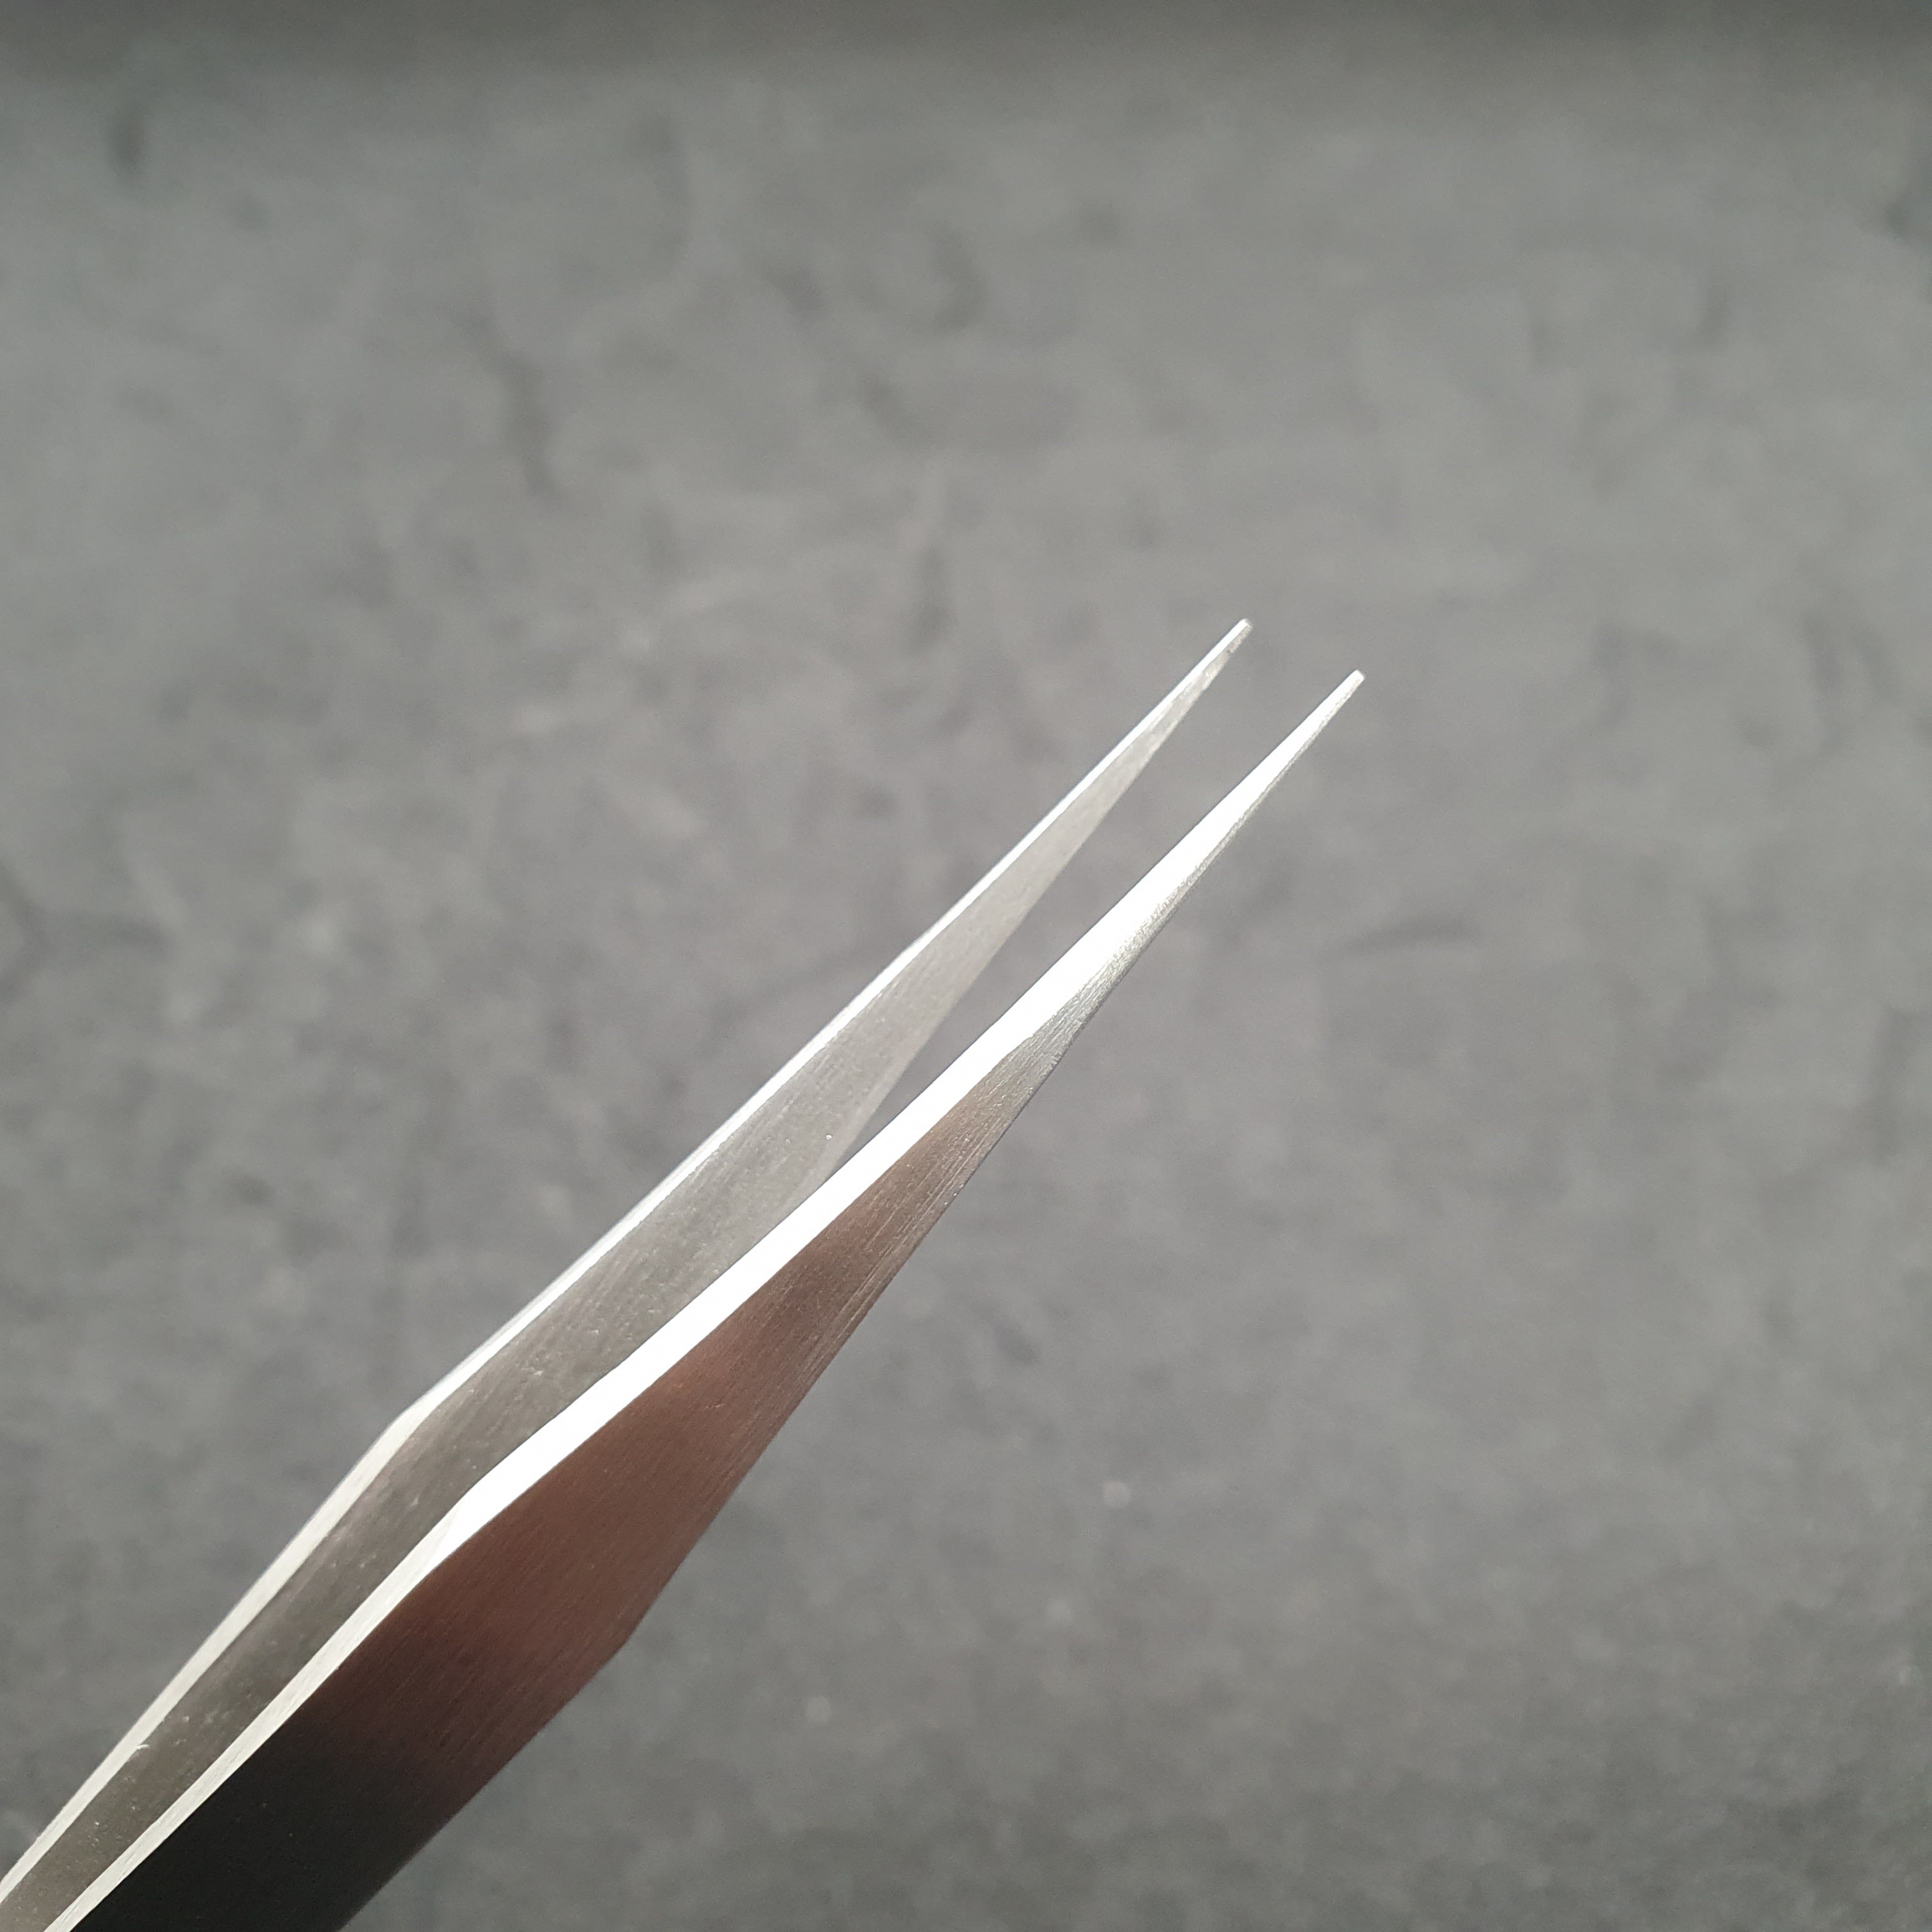 TW OOsa STRAIGHT END TWEEZERS - NON MAGNETIC MICRO POINT